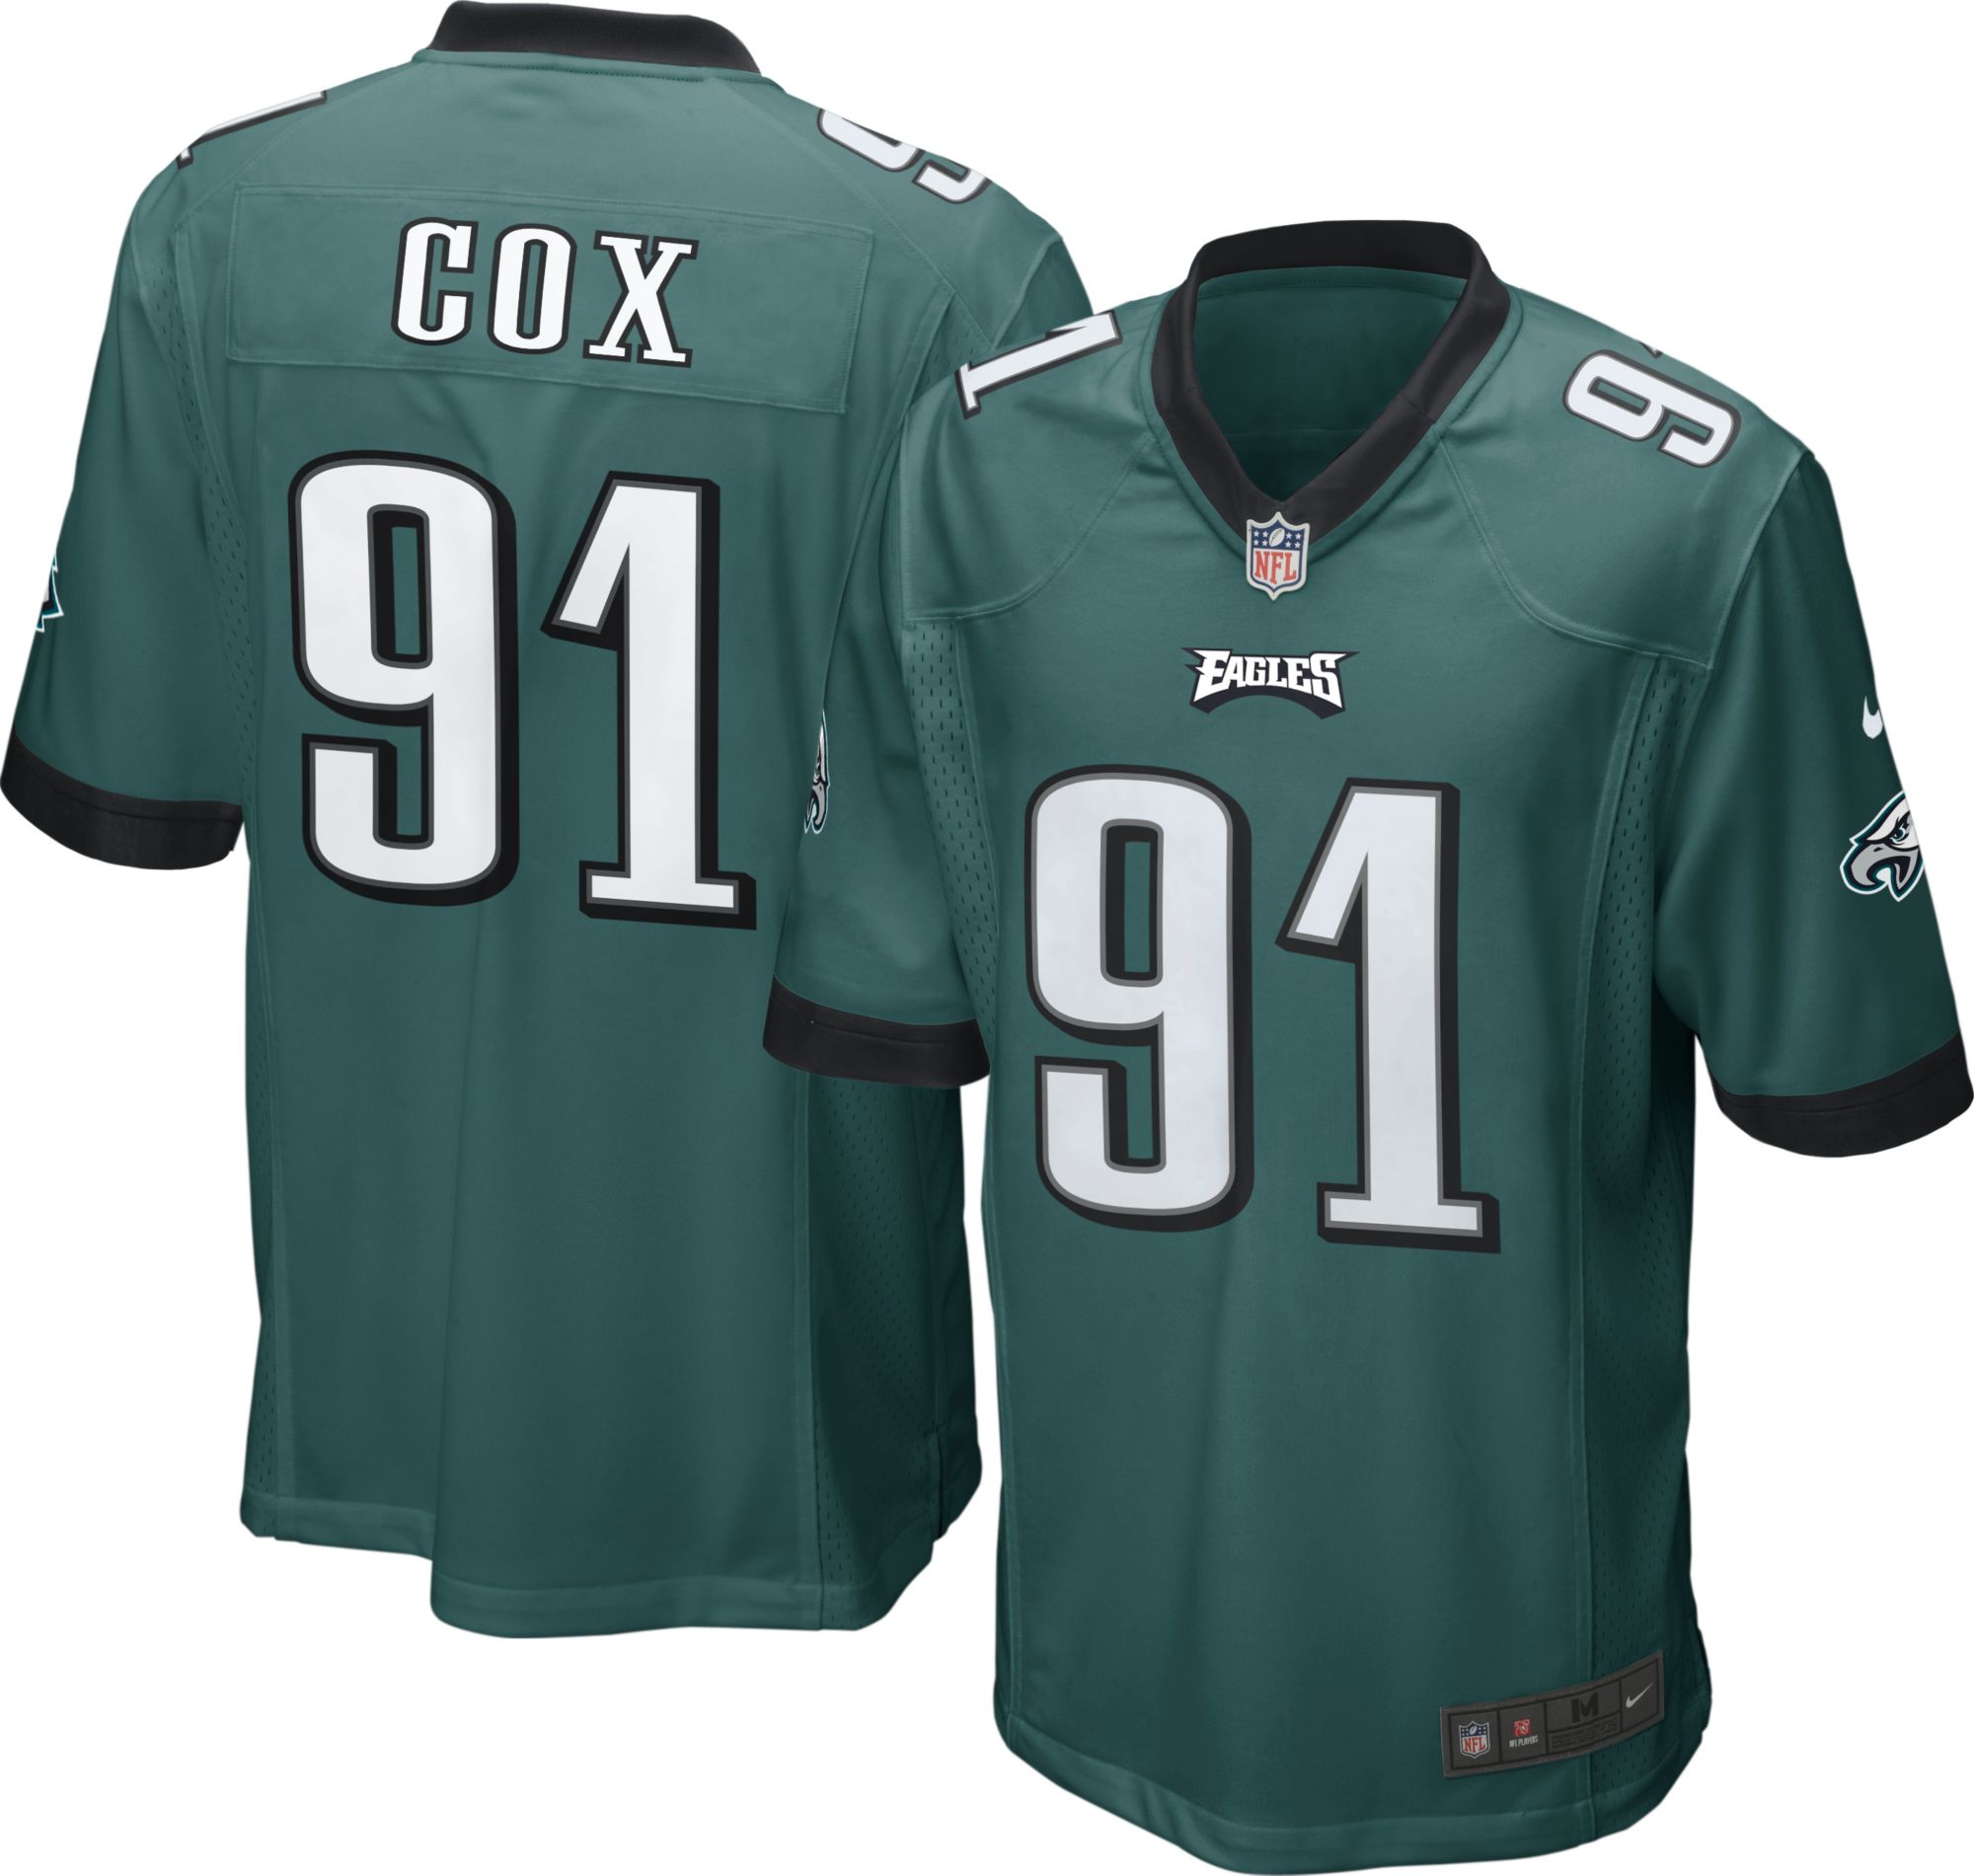 Wholesale Best Quality New Kelly Green #1 Jalen Hurts #11 AJ Brown #6  DeVonta Smith #62 Jason Kelce Stitched American Football Jersey From  m.